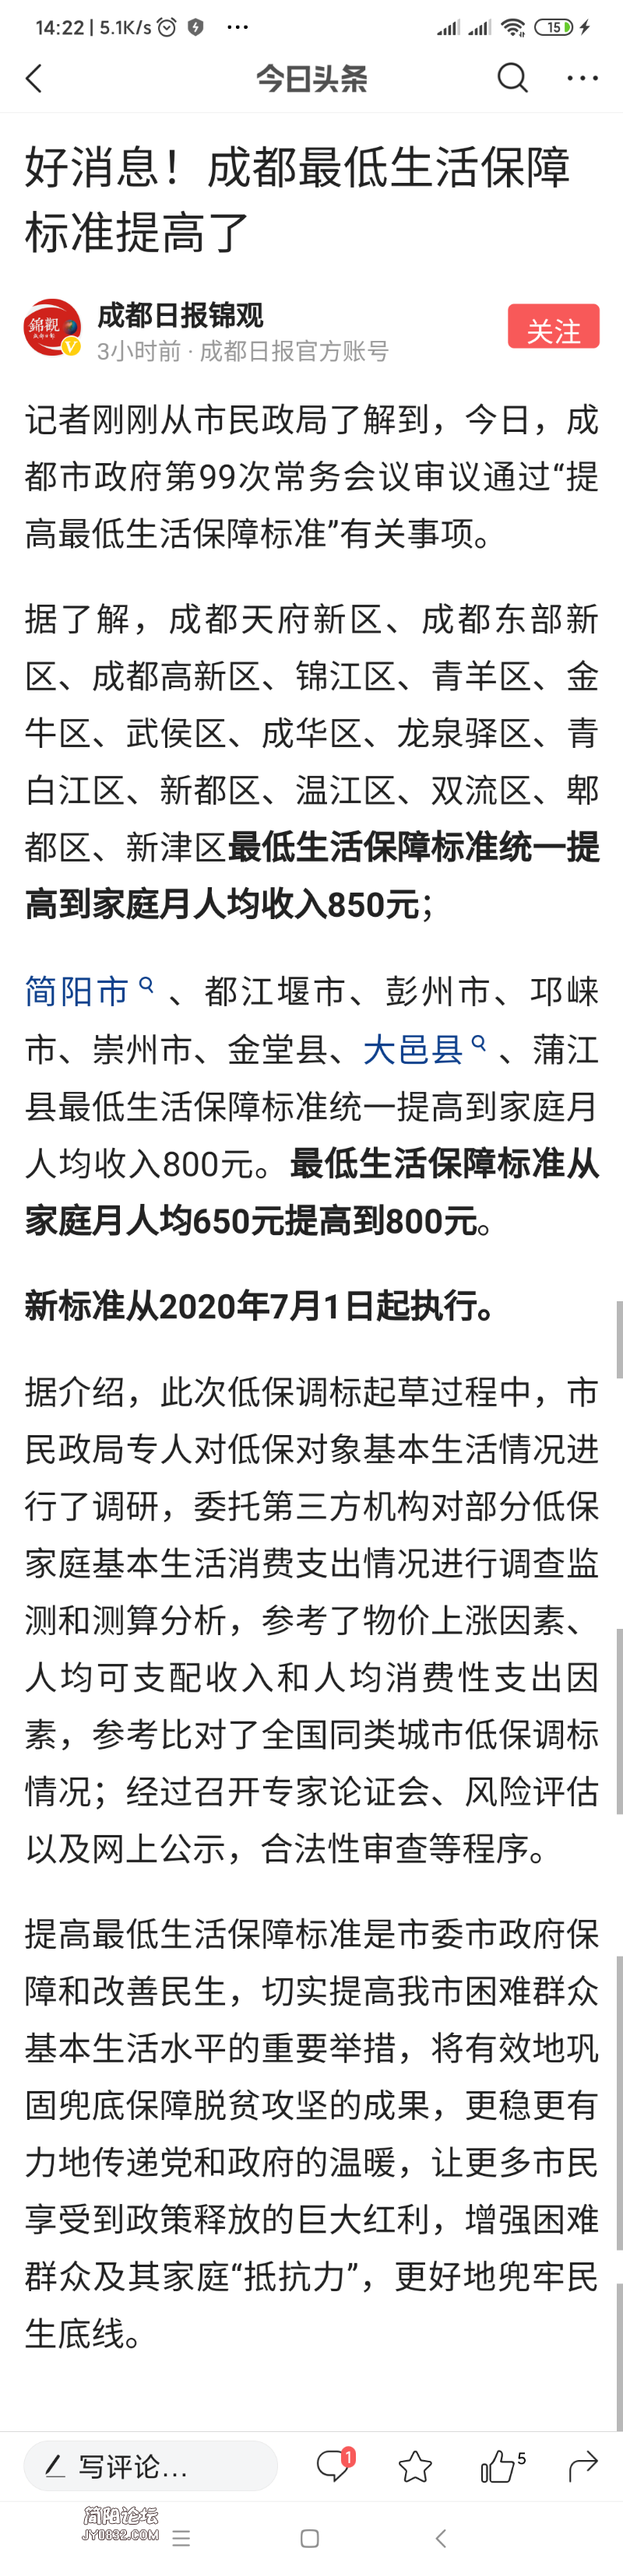 Screenshot_2020-07-07-14-22-29-774_com.ss.android.article.news.png